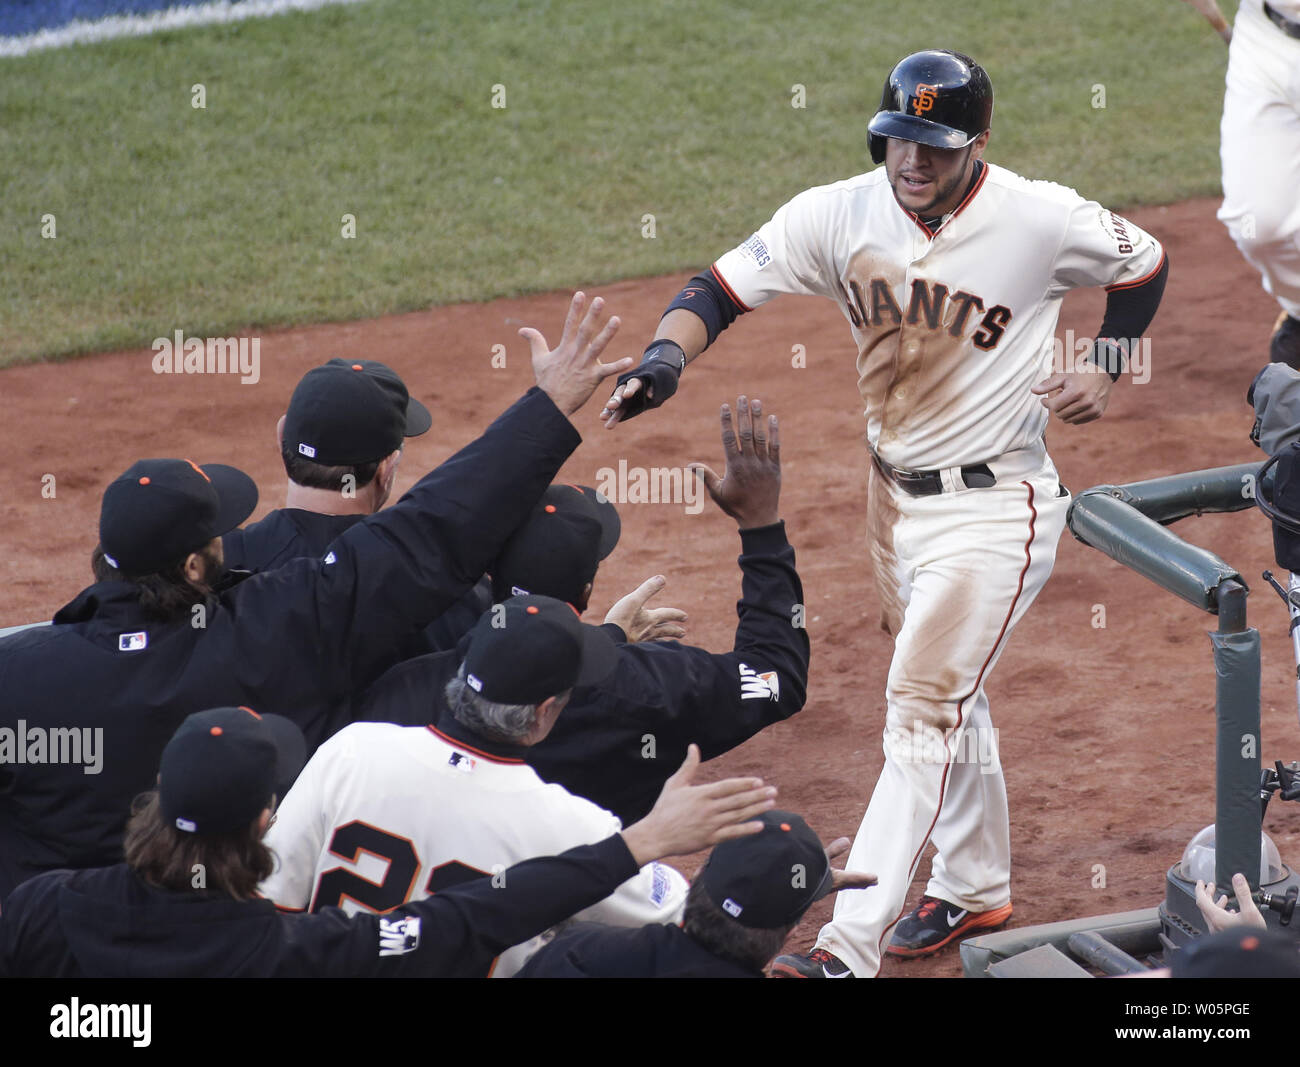 San Francisco Giants Gregor Blanco is congratulated at the dugout after scoring against the Kansas City Royals in the first inning of game 4 of the World Series at AT&T Park in San Francisco on October 25, 2014. The Giants evened the Series with an 11-4 win.     UPI/Bruce Gordon Stock Photo